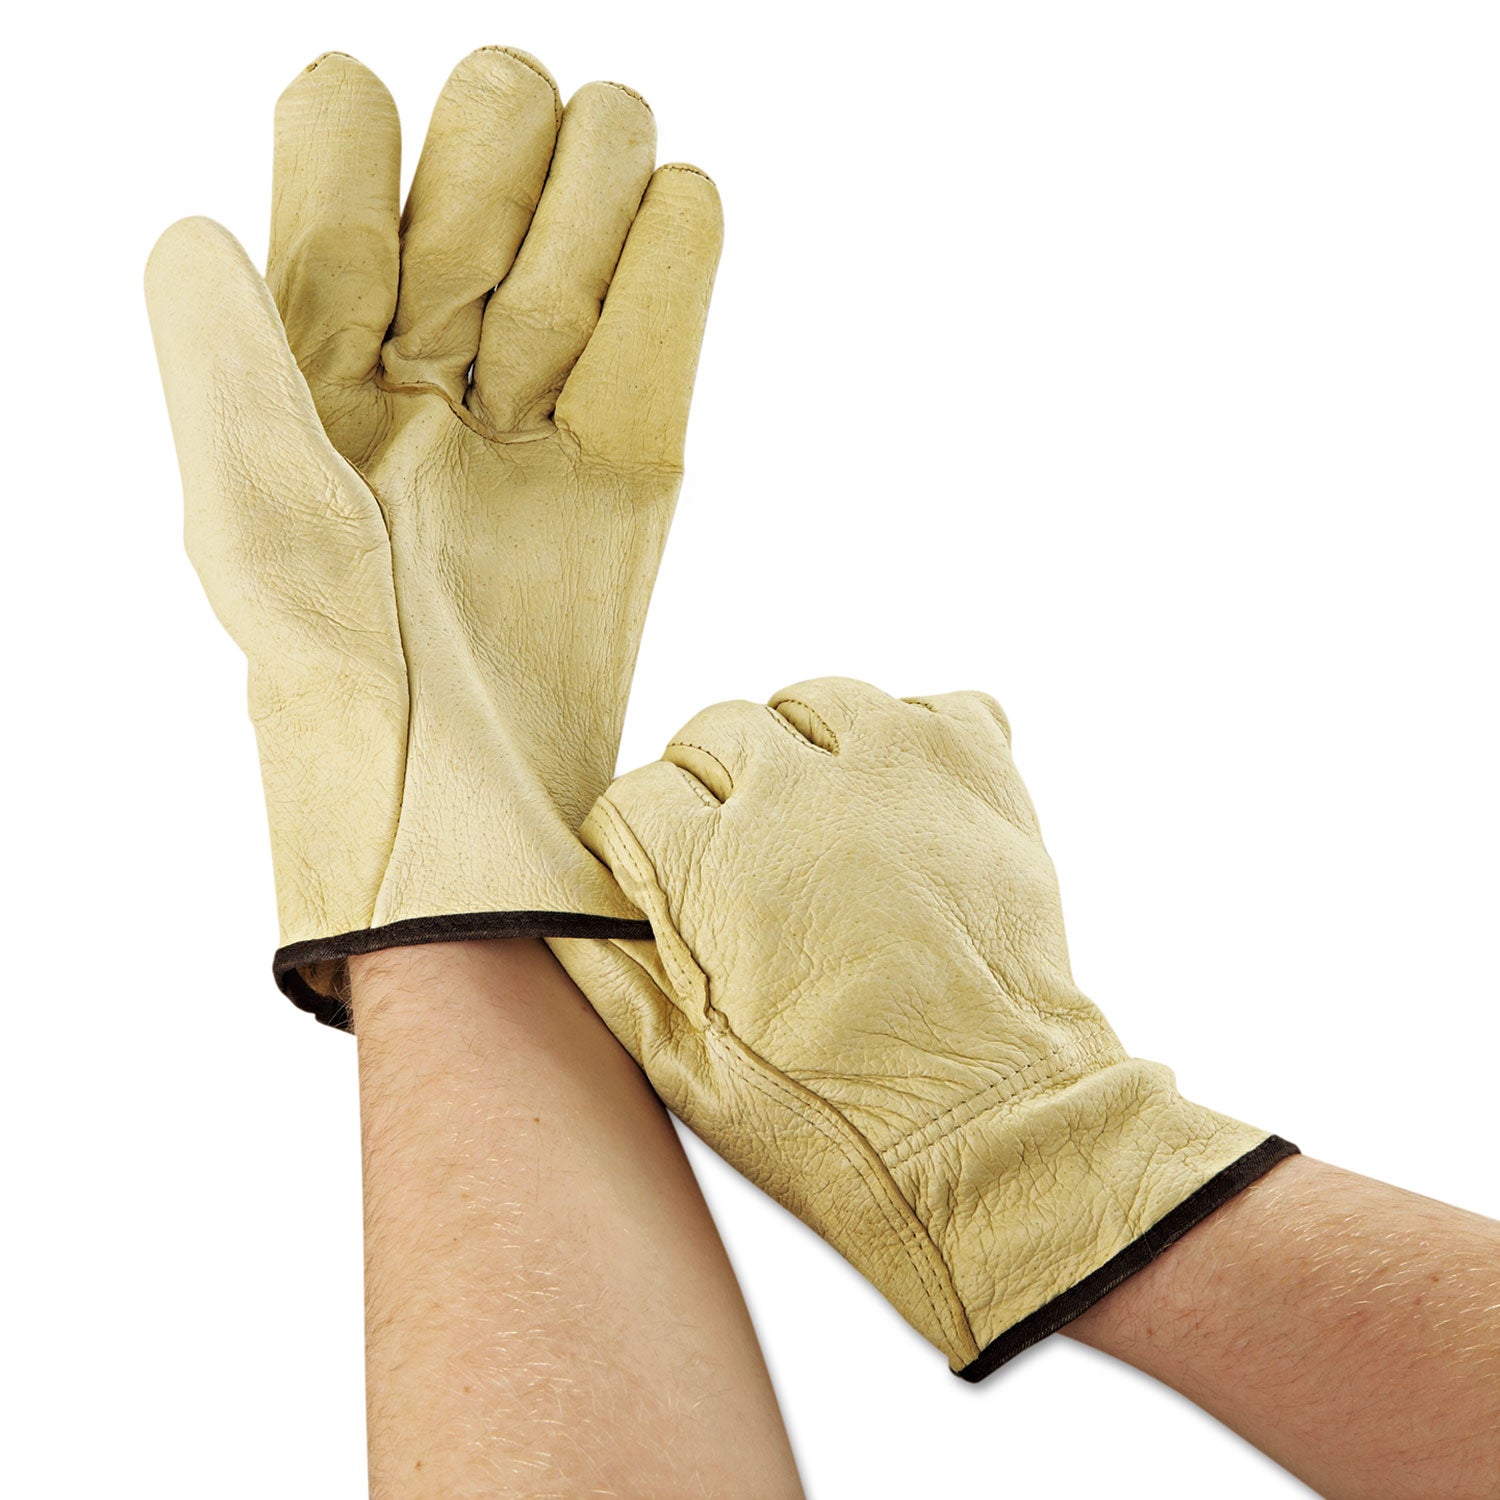 Unlined Pigskin Driver Gloves, Cream, Large, 12 Pairs - 